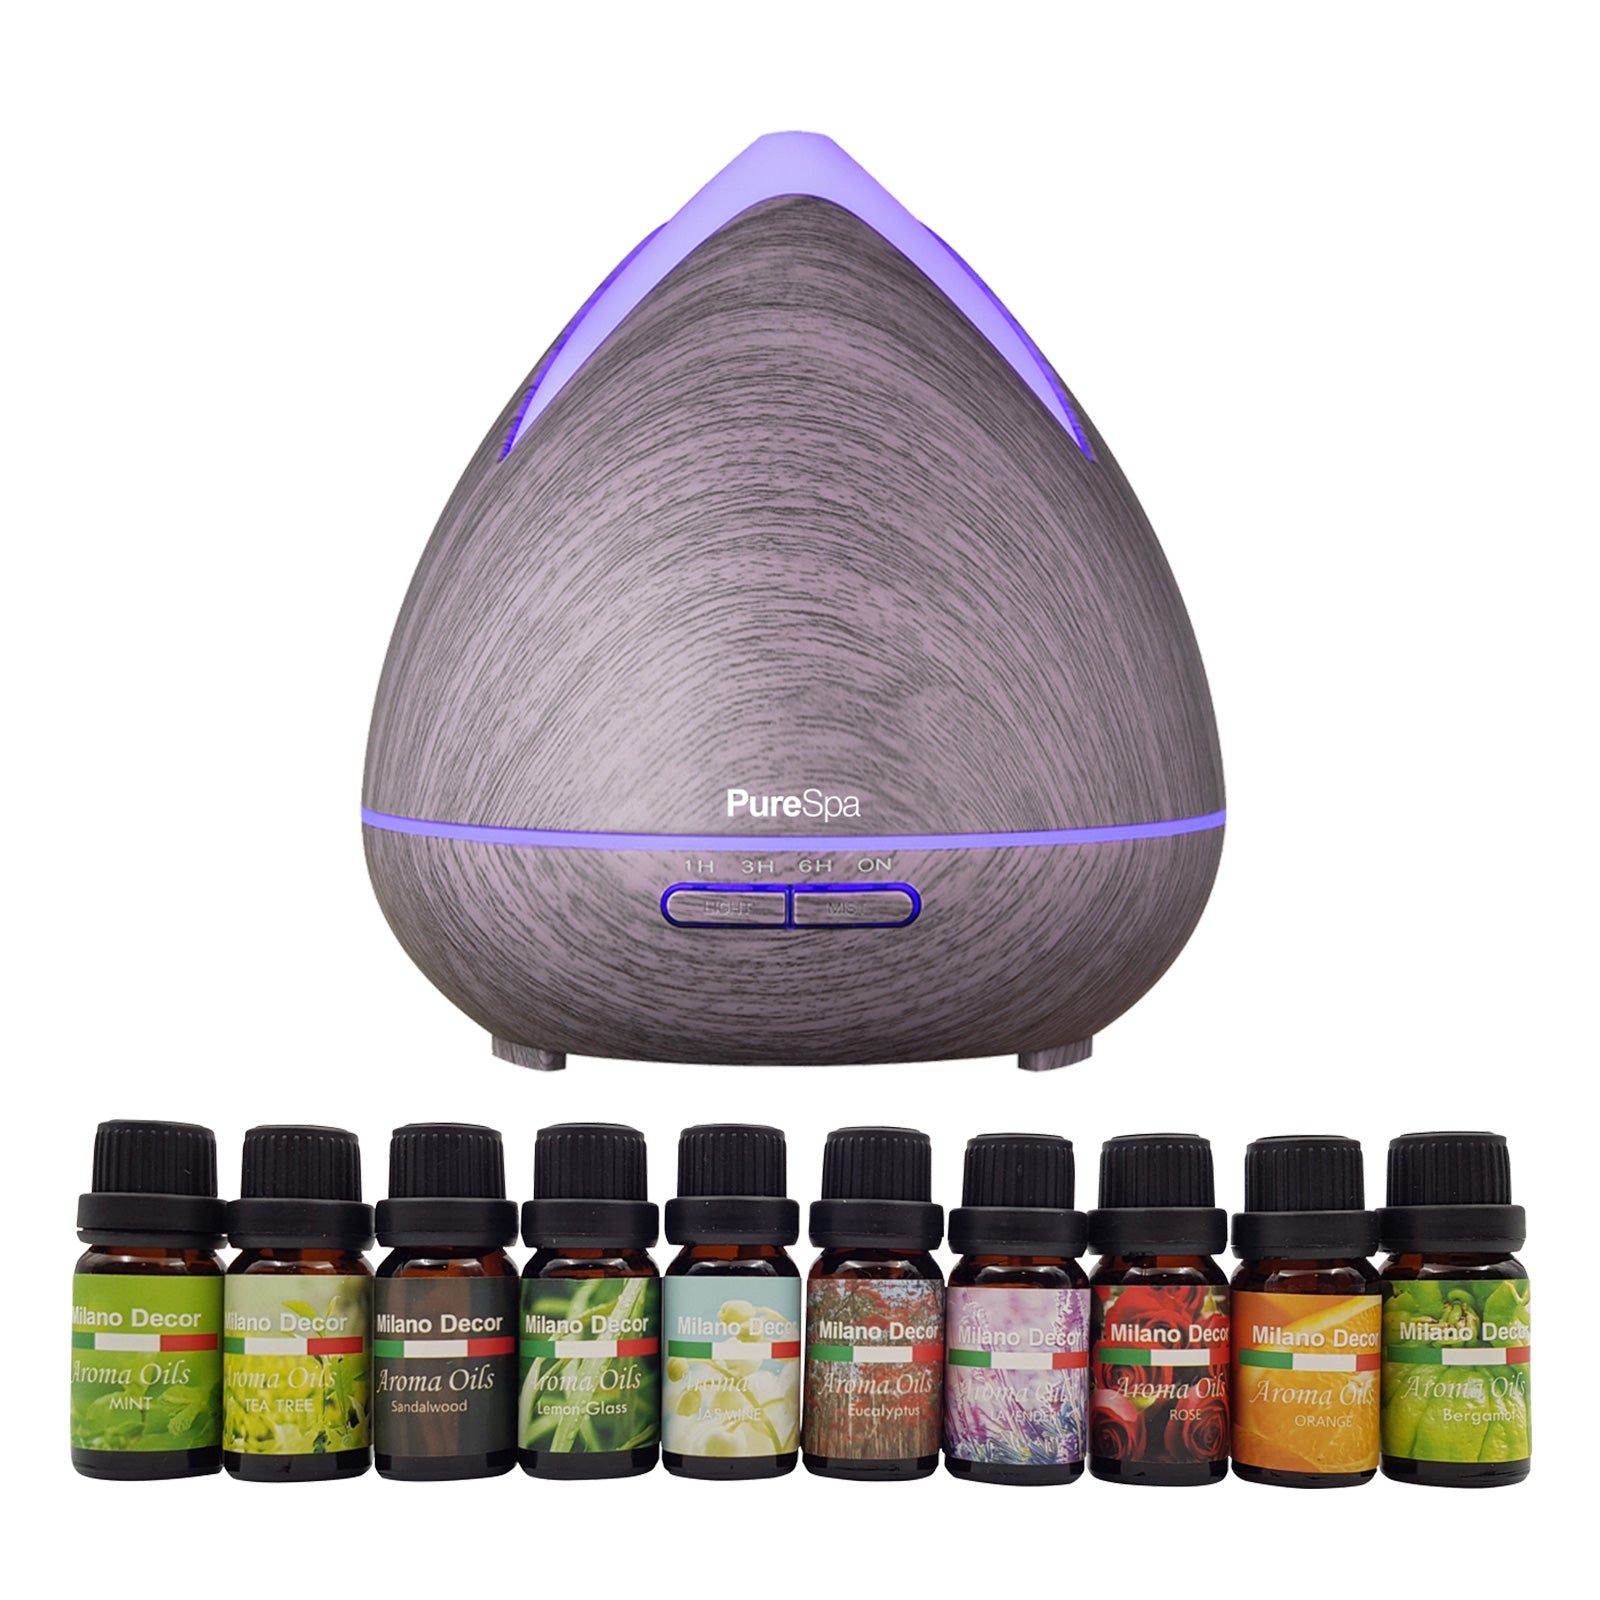 Purespa Diffuser Set With 10 Pack Oils Humidifier Aromatherapy Violet - AULASH